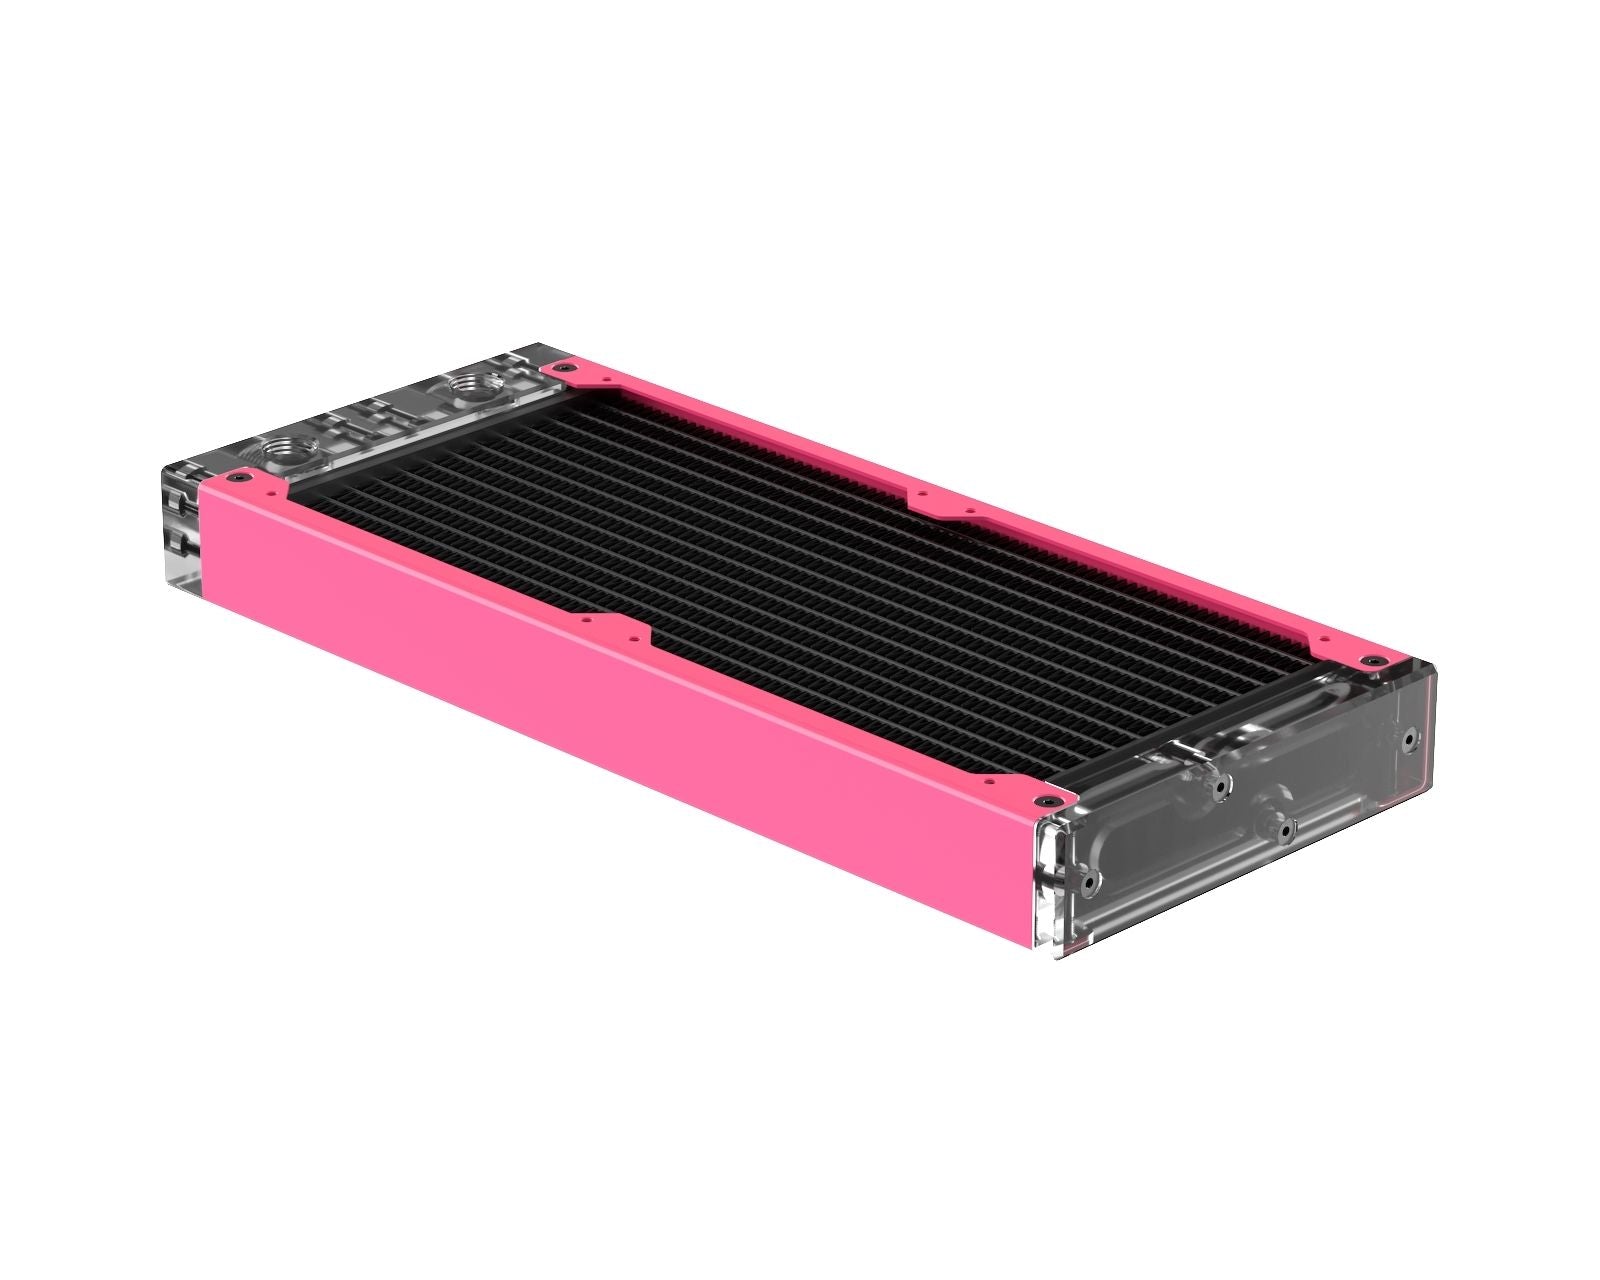 PrimoChill 240SL (30mm) EXIMO Modular Radiator, Clear Acrylic, 2x120mm, Dual Fan (R-SL-A24) Available in 20+ Colors, Assembled in USA and Custom Watercooling Loop Ready - UV Pink